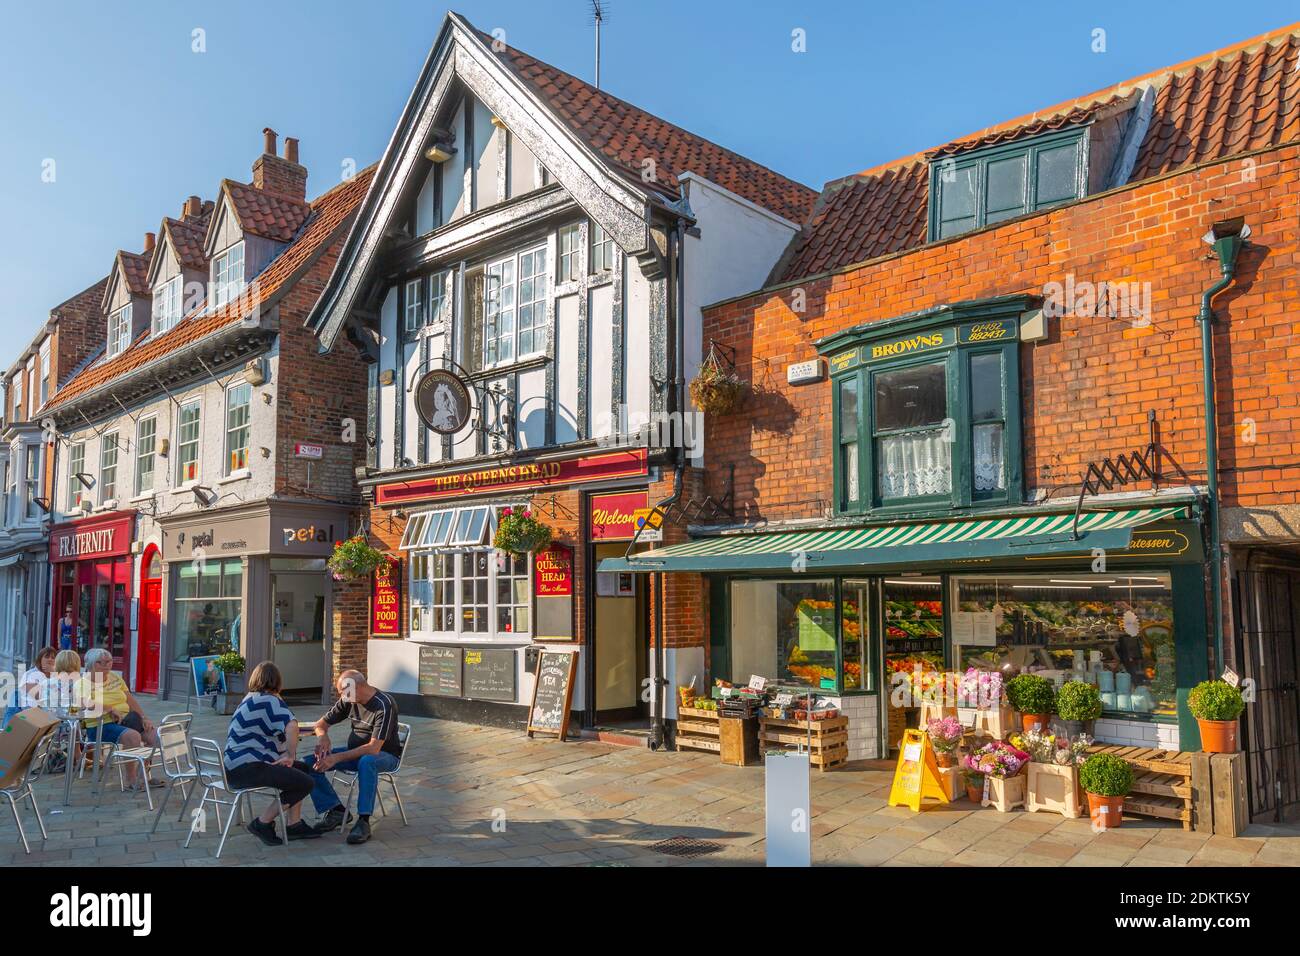 View of shops and cafe in the Market Square, Beverley, North Humberside, East Yorkshire, England, United Kingdom, Europe Stock Photo